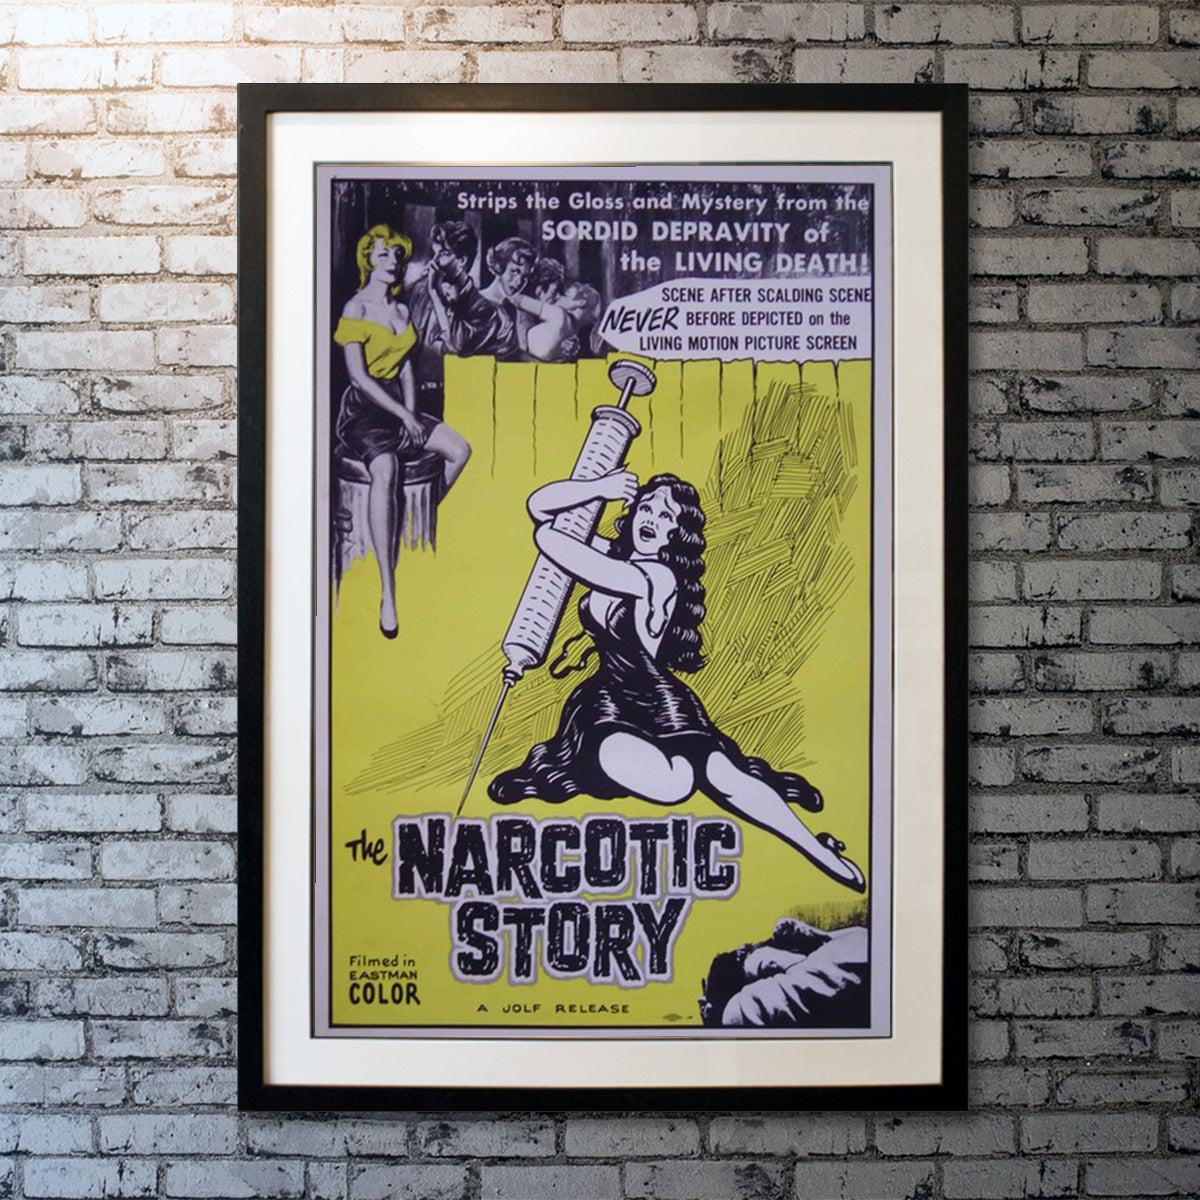 Narcotic Story (1958)